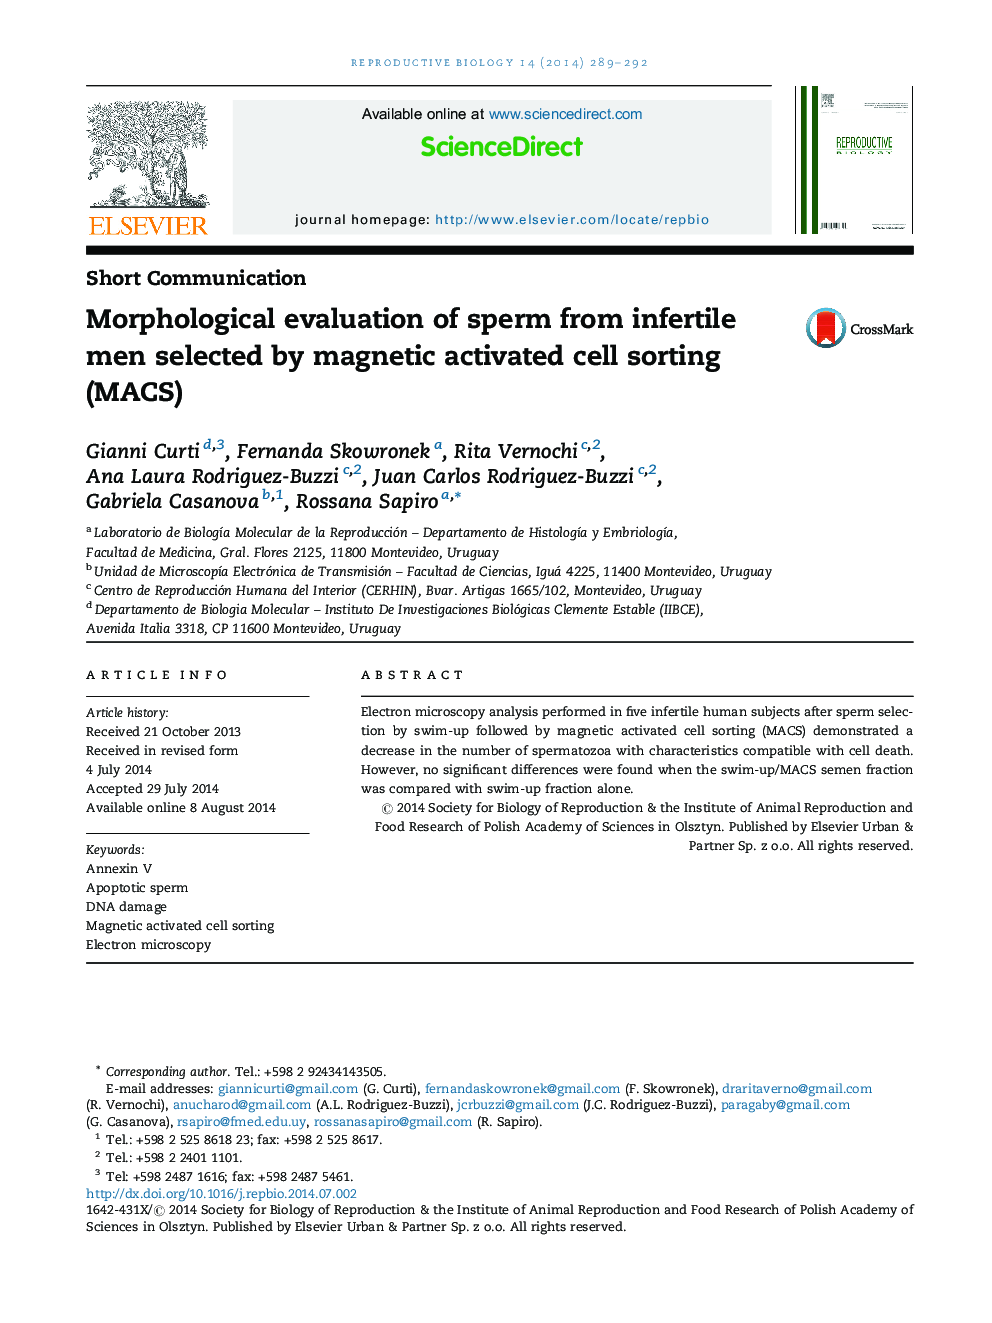 Morphological evaluation of sperm from infertile men selected by magnetic activated cell sorting (MACS)